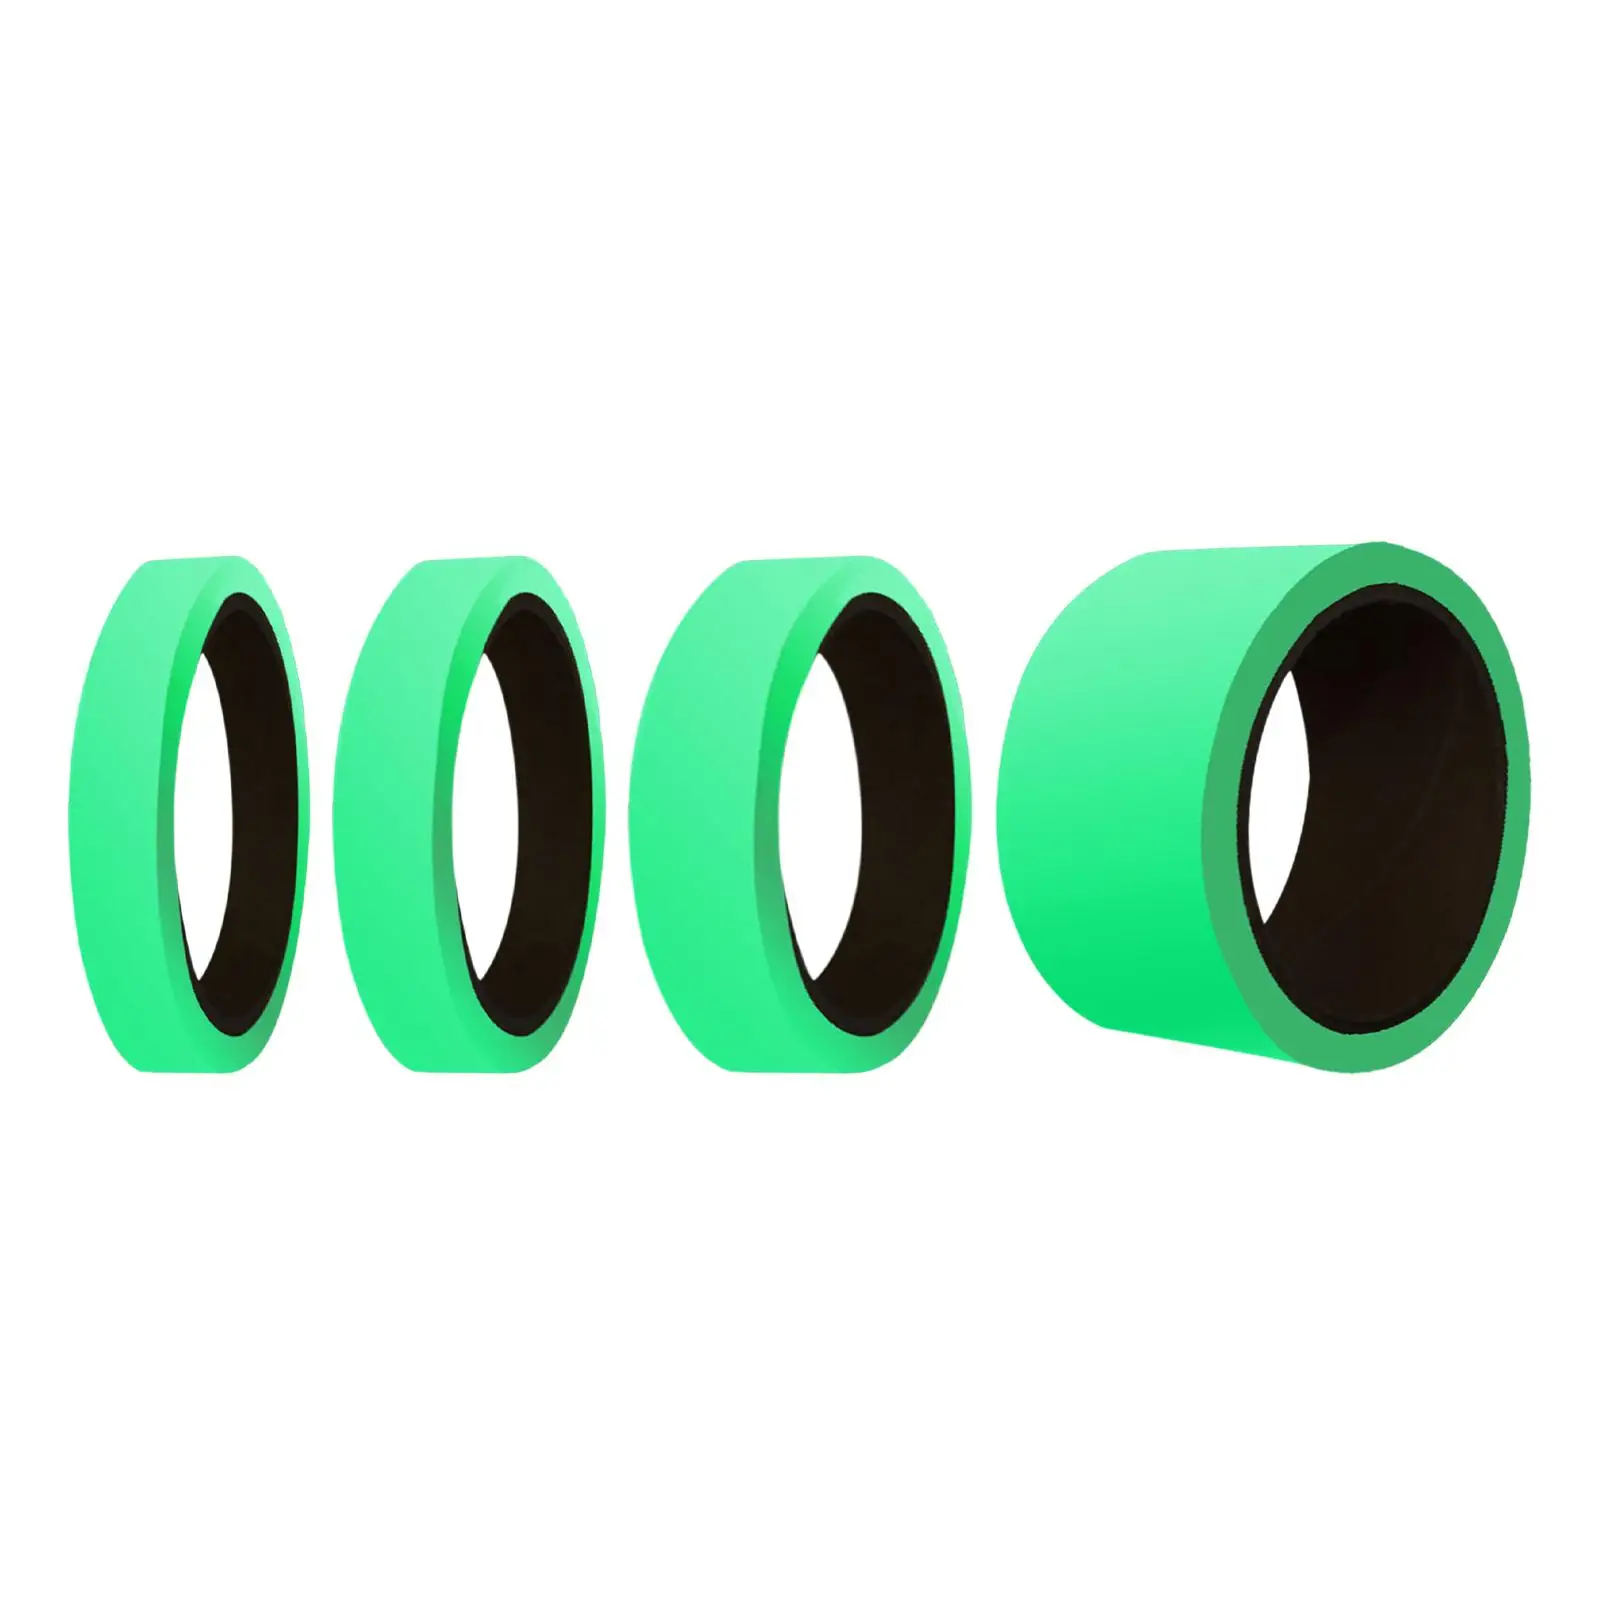 Glow in The Dark Tape 9.8ft Luminous Tape Green for Emergency Exit Night Decorations Theater Stage Outdoor Sports Home Marking